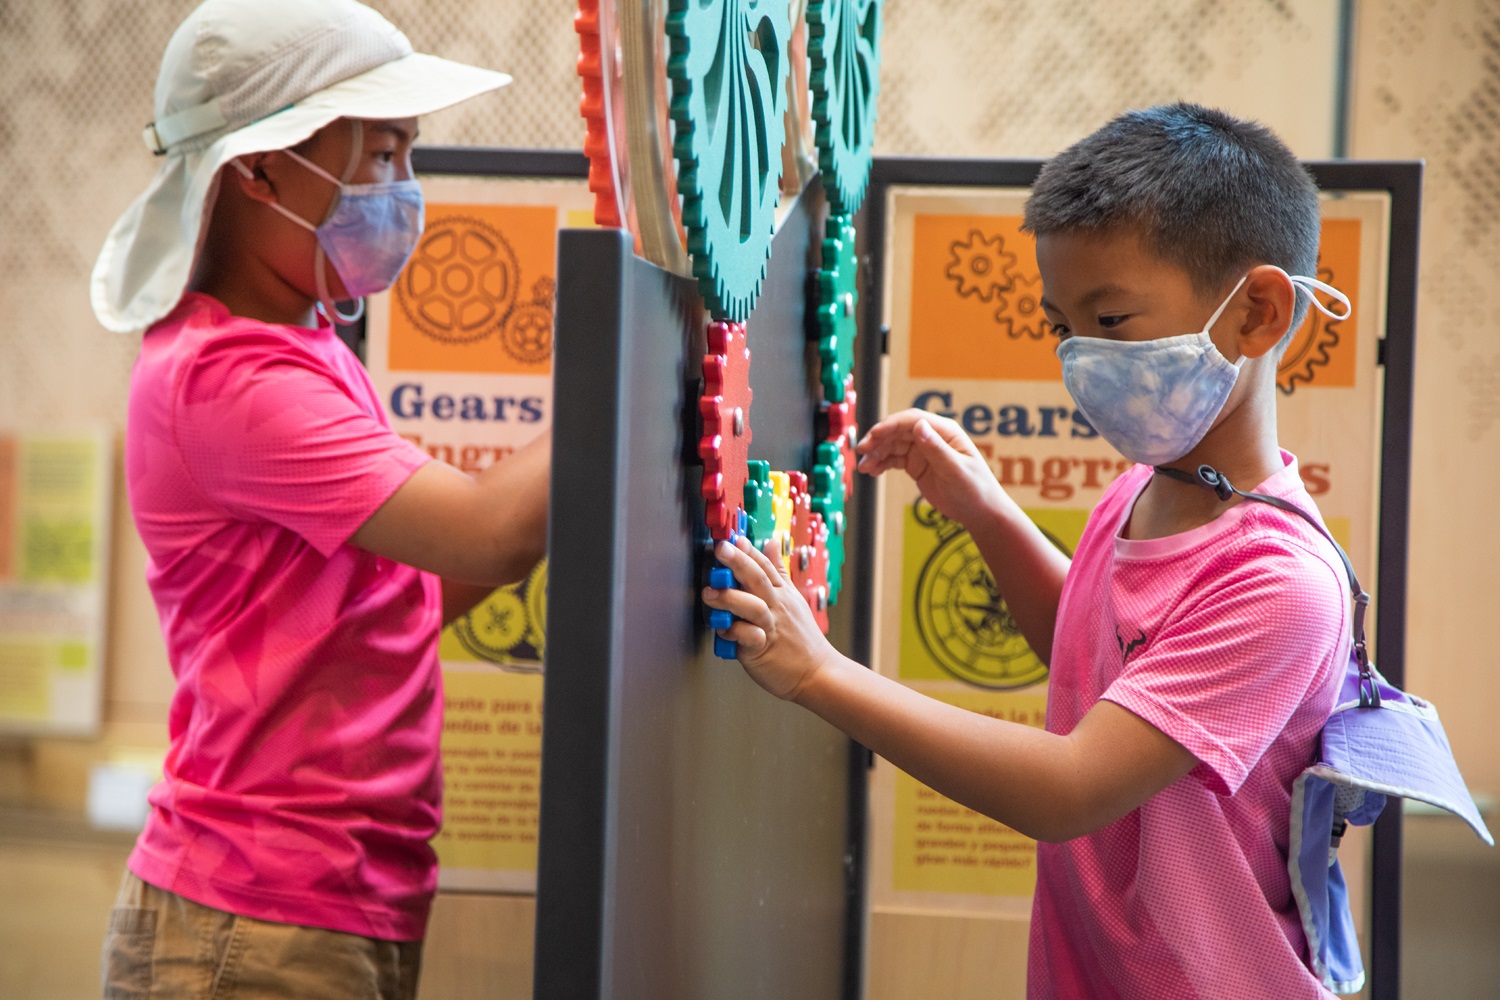 Two Children in the Museum using Gears